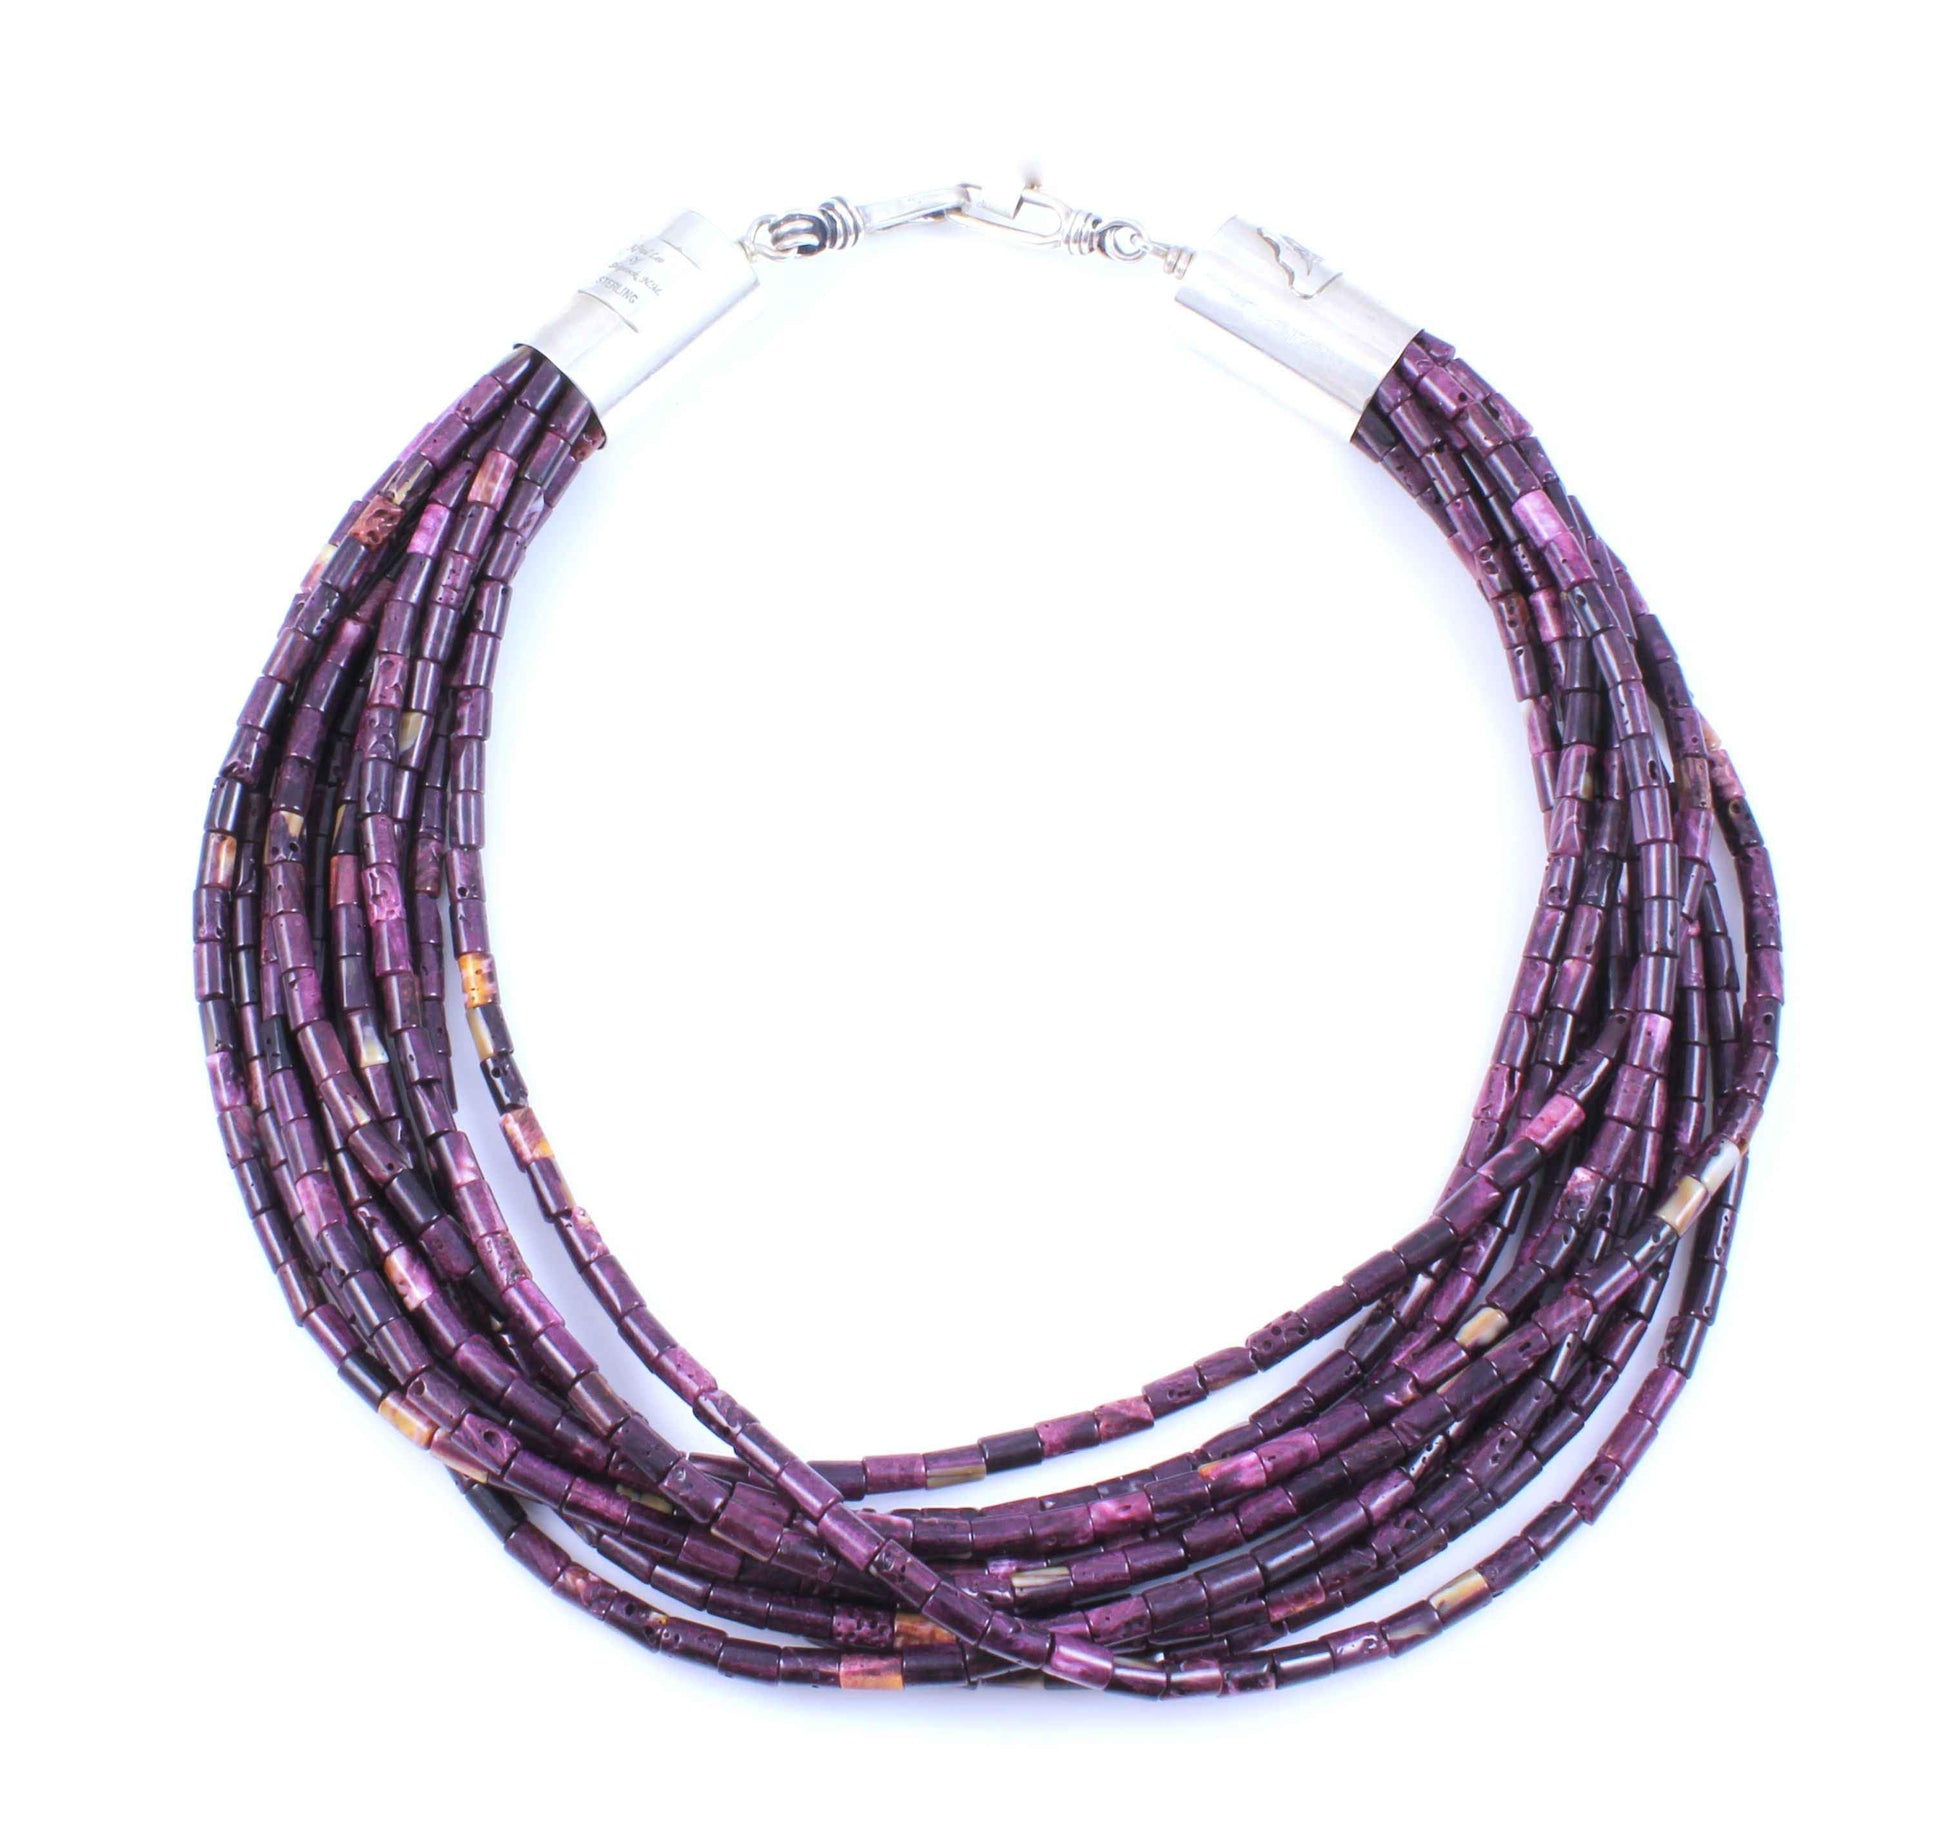 Alfred Lee Jr-Sorrel Sky Gallery-Jewelry-Purple Spiny Oyster Necklace